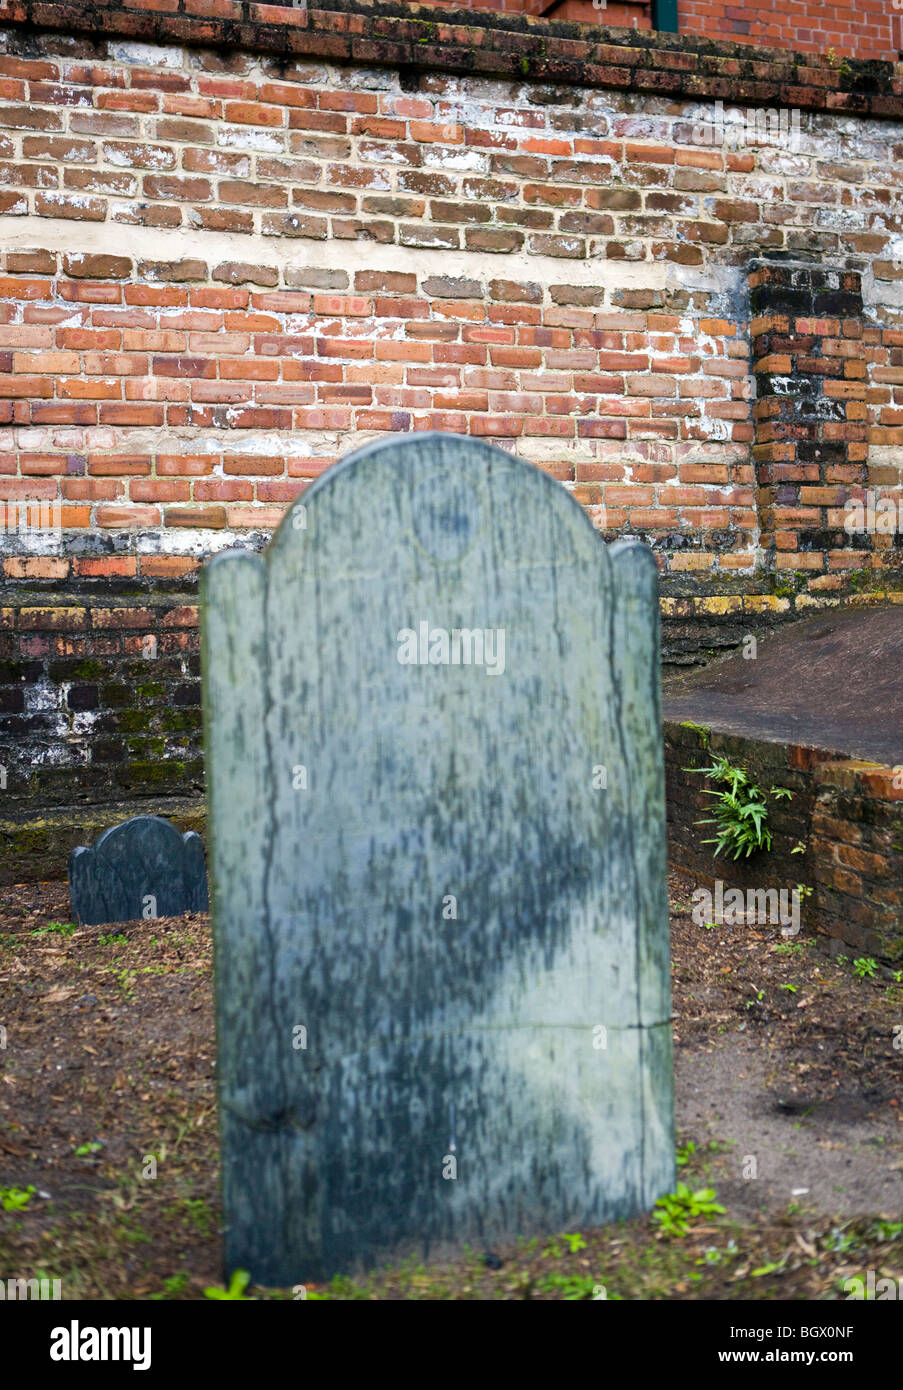 Unmarked gravestone in front of brick wall to Centenial Park, commissioned by George Washington, Savannah, Georgia Stock Photo